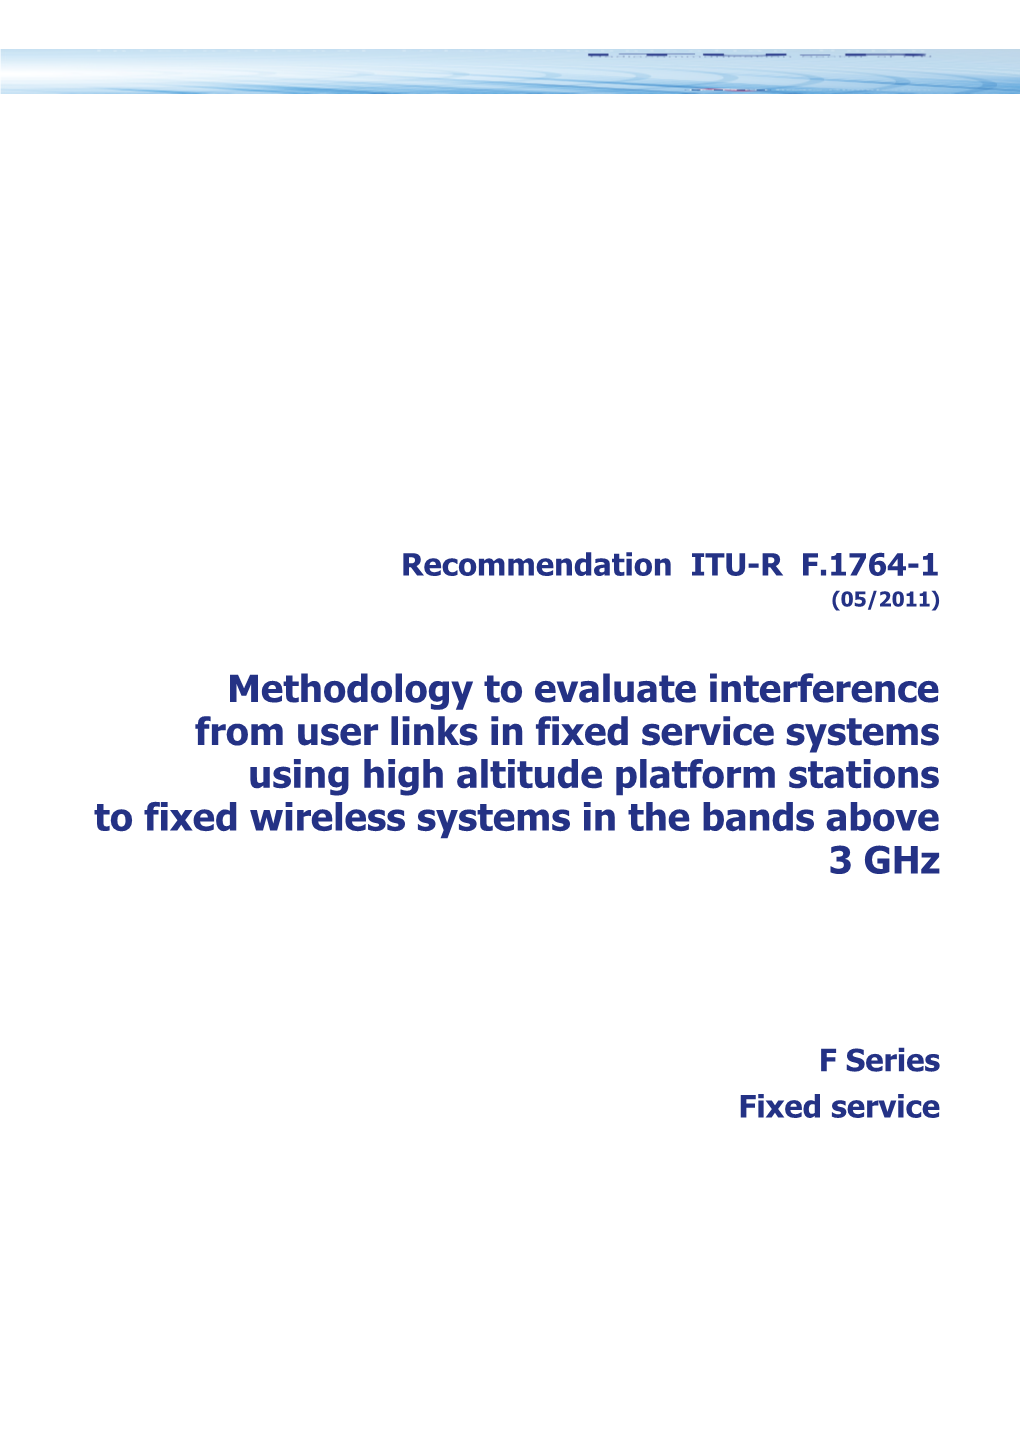 RECOMMENDATION ITU-R F.1764-1 - Methodology to Evaluate Interference from User Links In